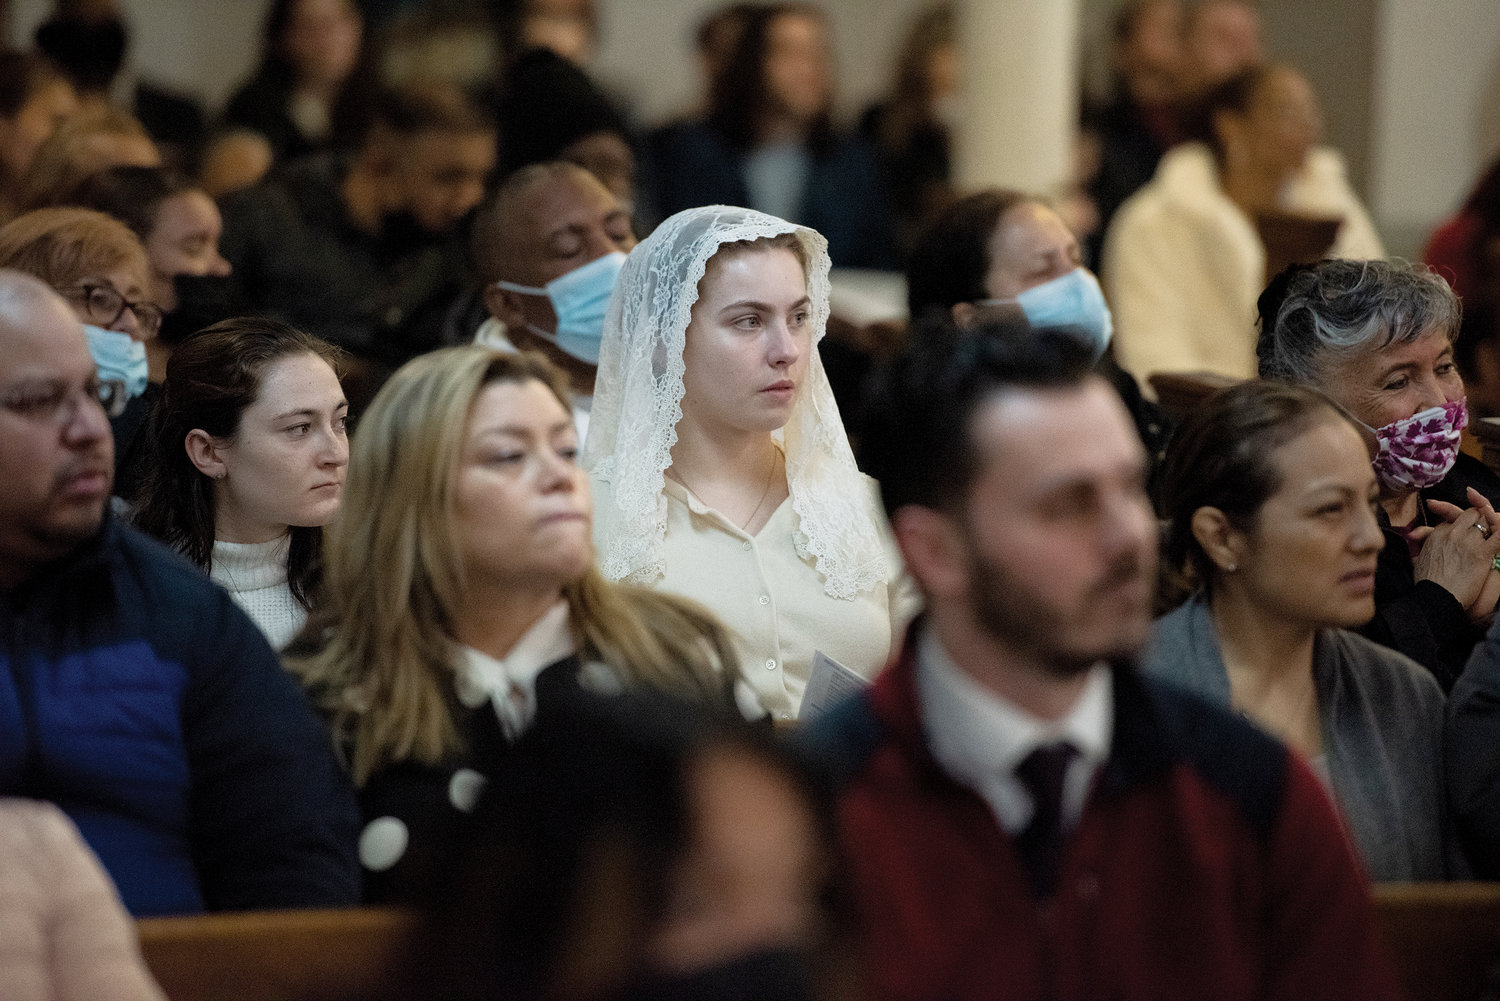 The faithful pray during the April 7 Mass in honor of Blessed Carlo Acutis at St. Rita of Cascia Church in the Bronx. The evening included a Holy Hour and veneration of a first-class relic of Blessed Carlo.